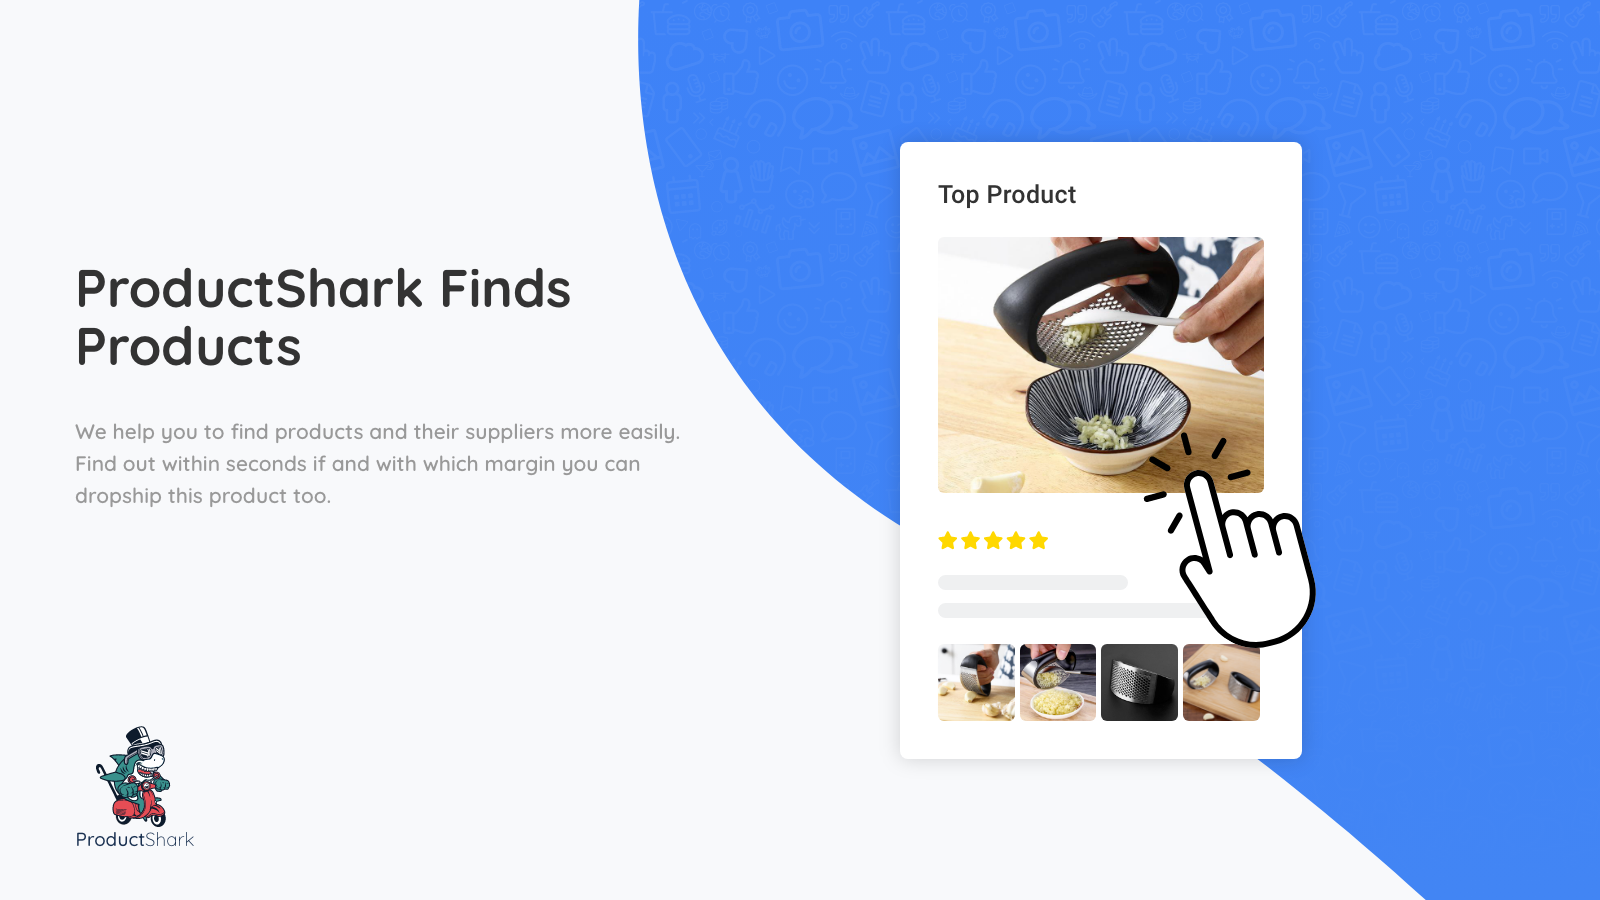 ProductShark Finds Products